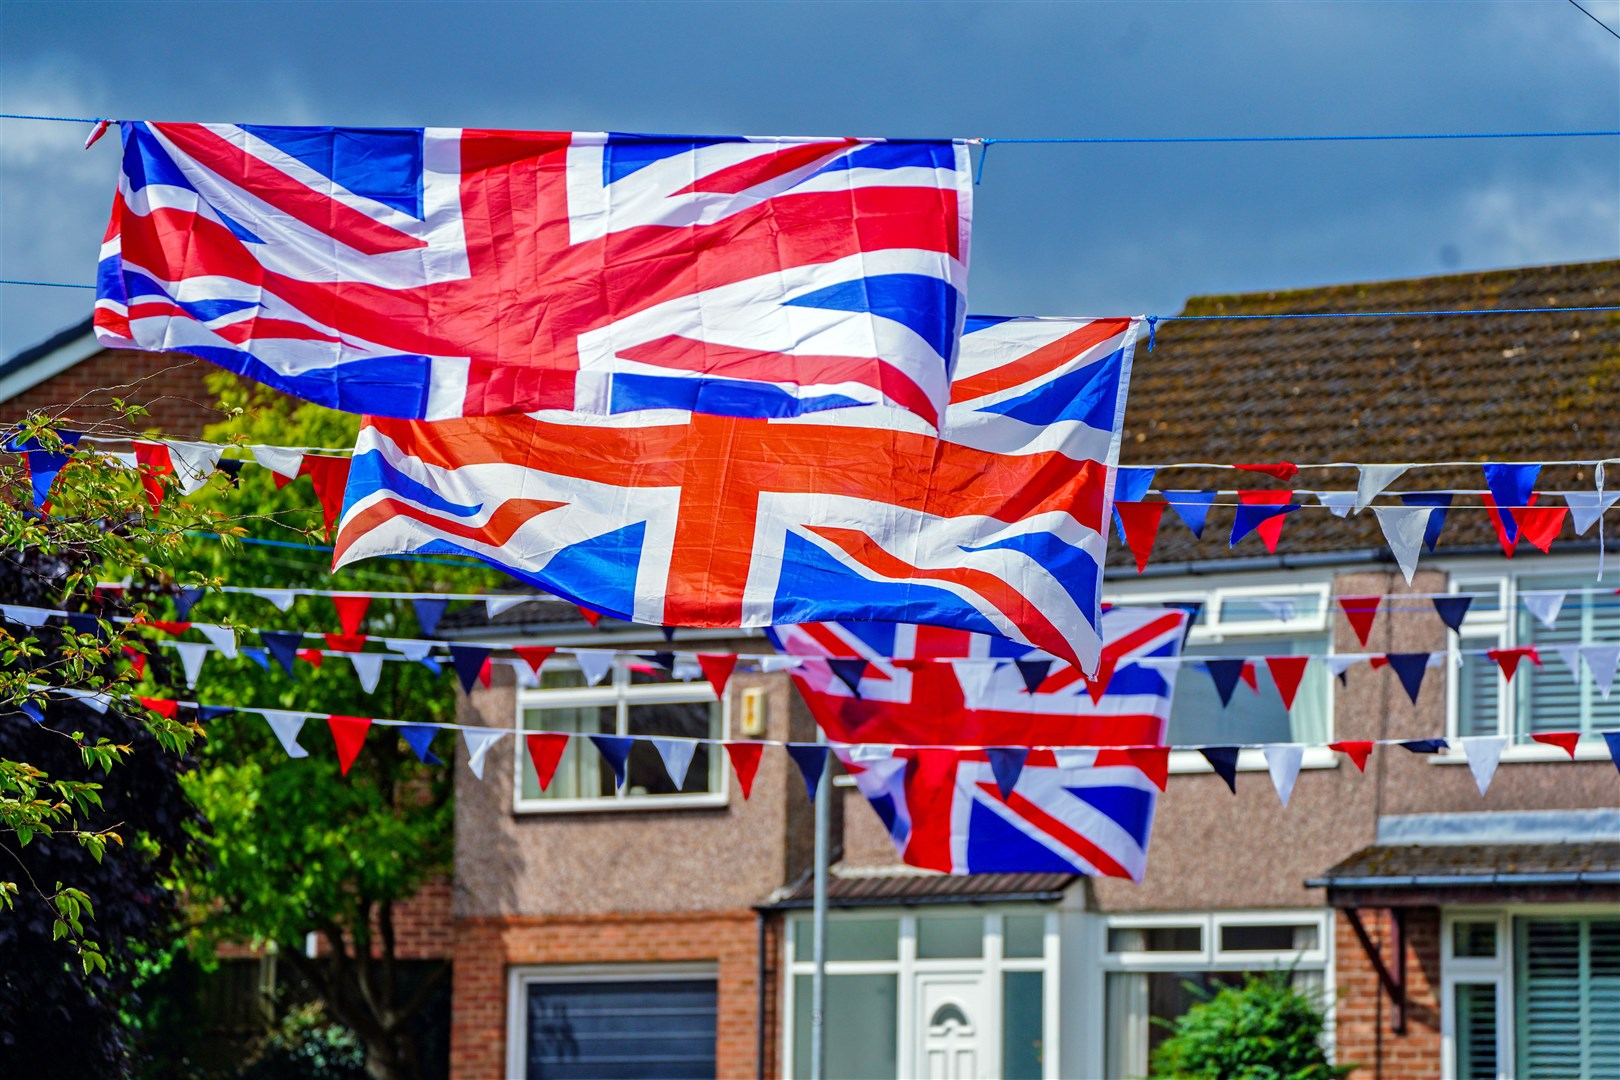 Fairlie Drive in Rainhill, Merseyside, is decorated ahead of the Platinum Jubilee celebrations (Peter Byrne/PA)